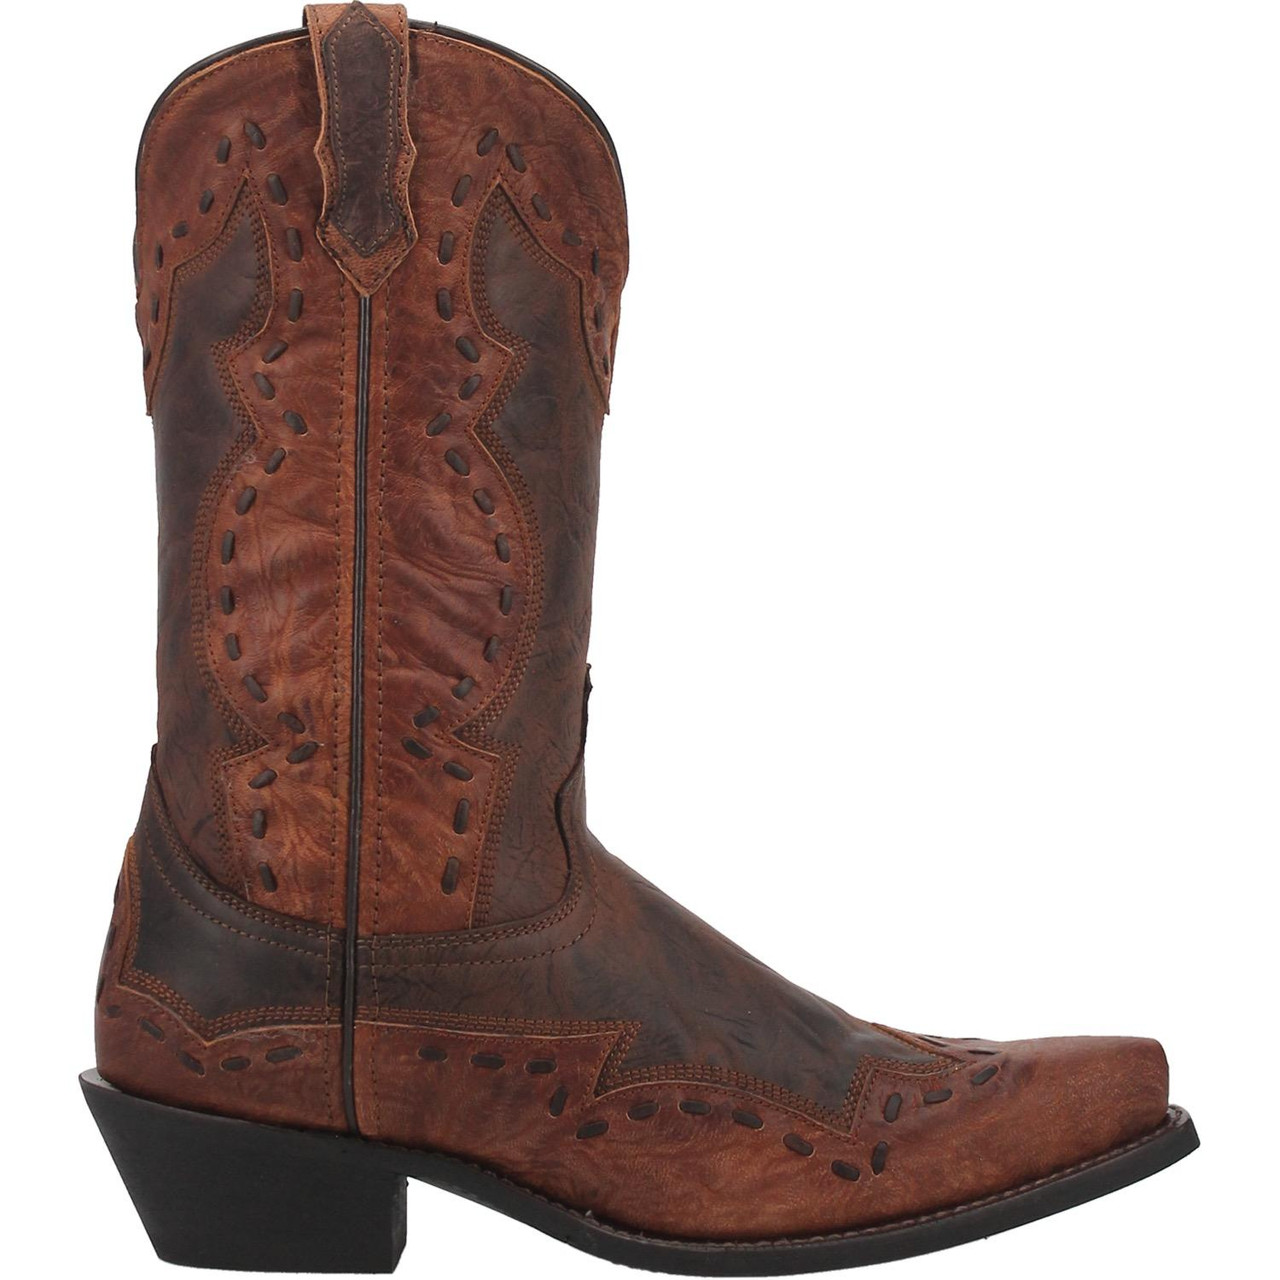 LAREDO RONNIE MEN'S LEATHER BOOTS 68471